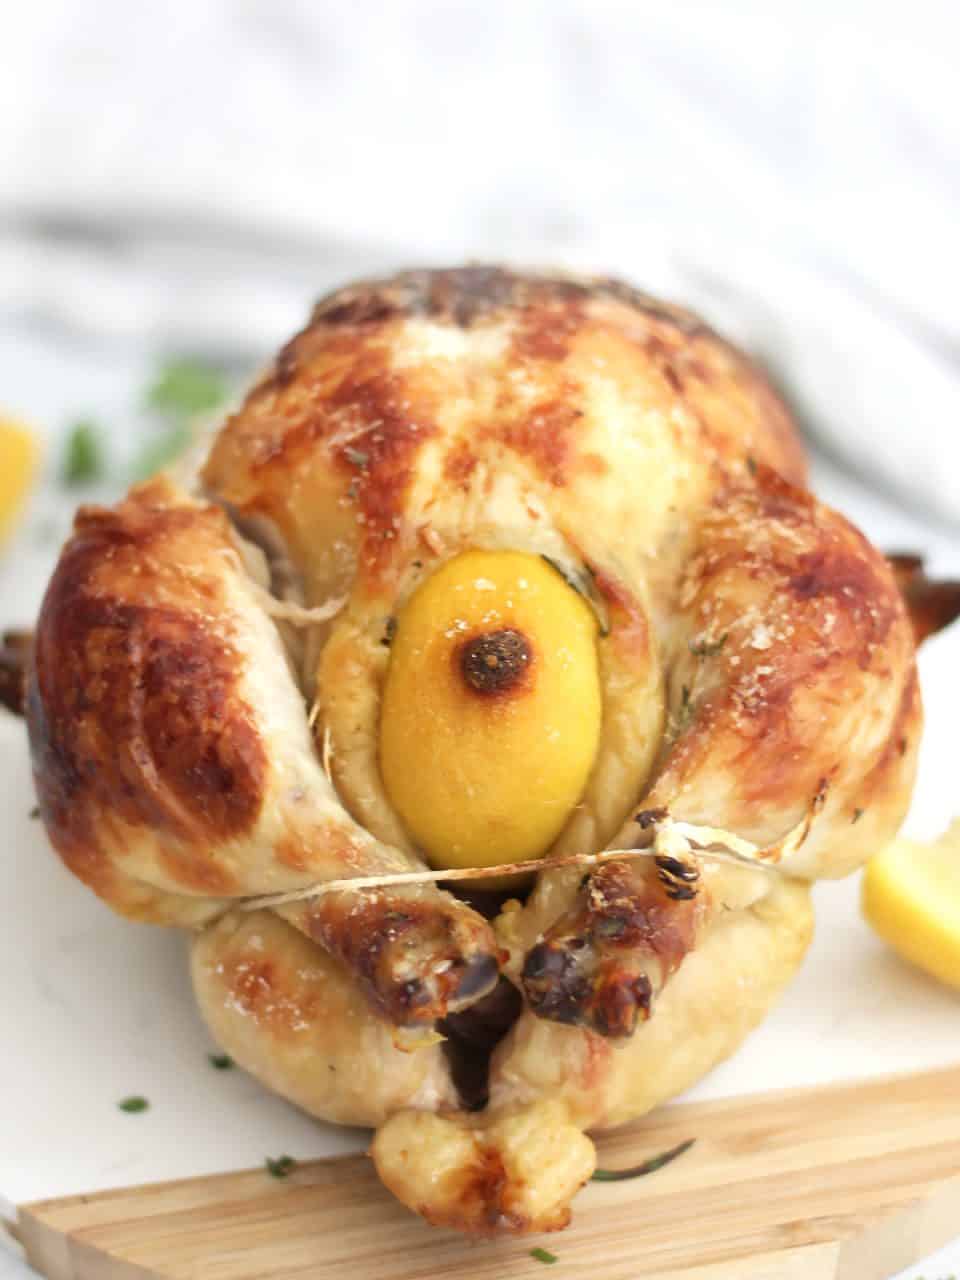 Buttermilk roasted chicken stuffed with herbs and a lemon.